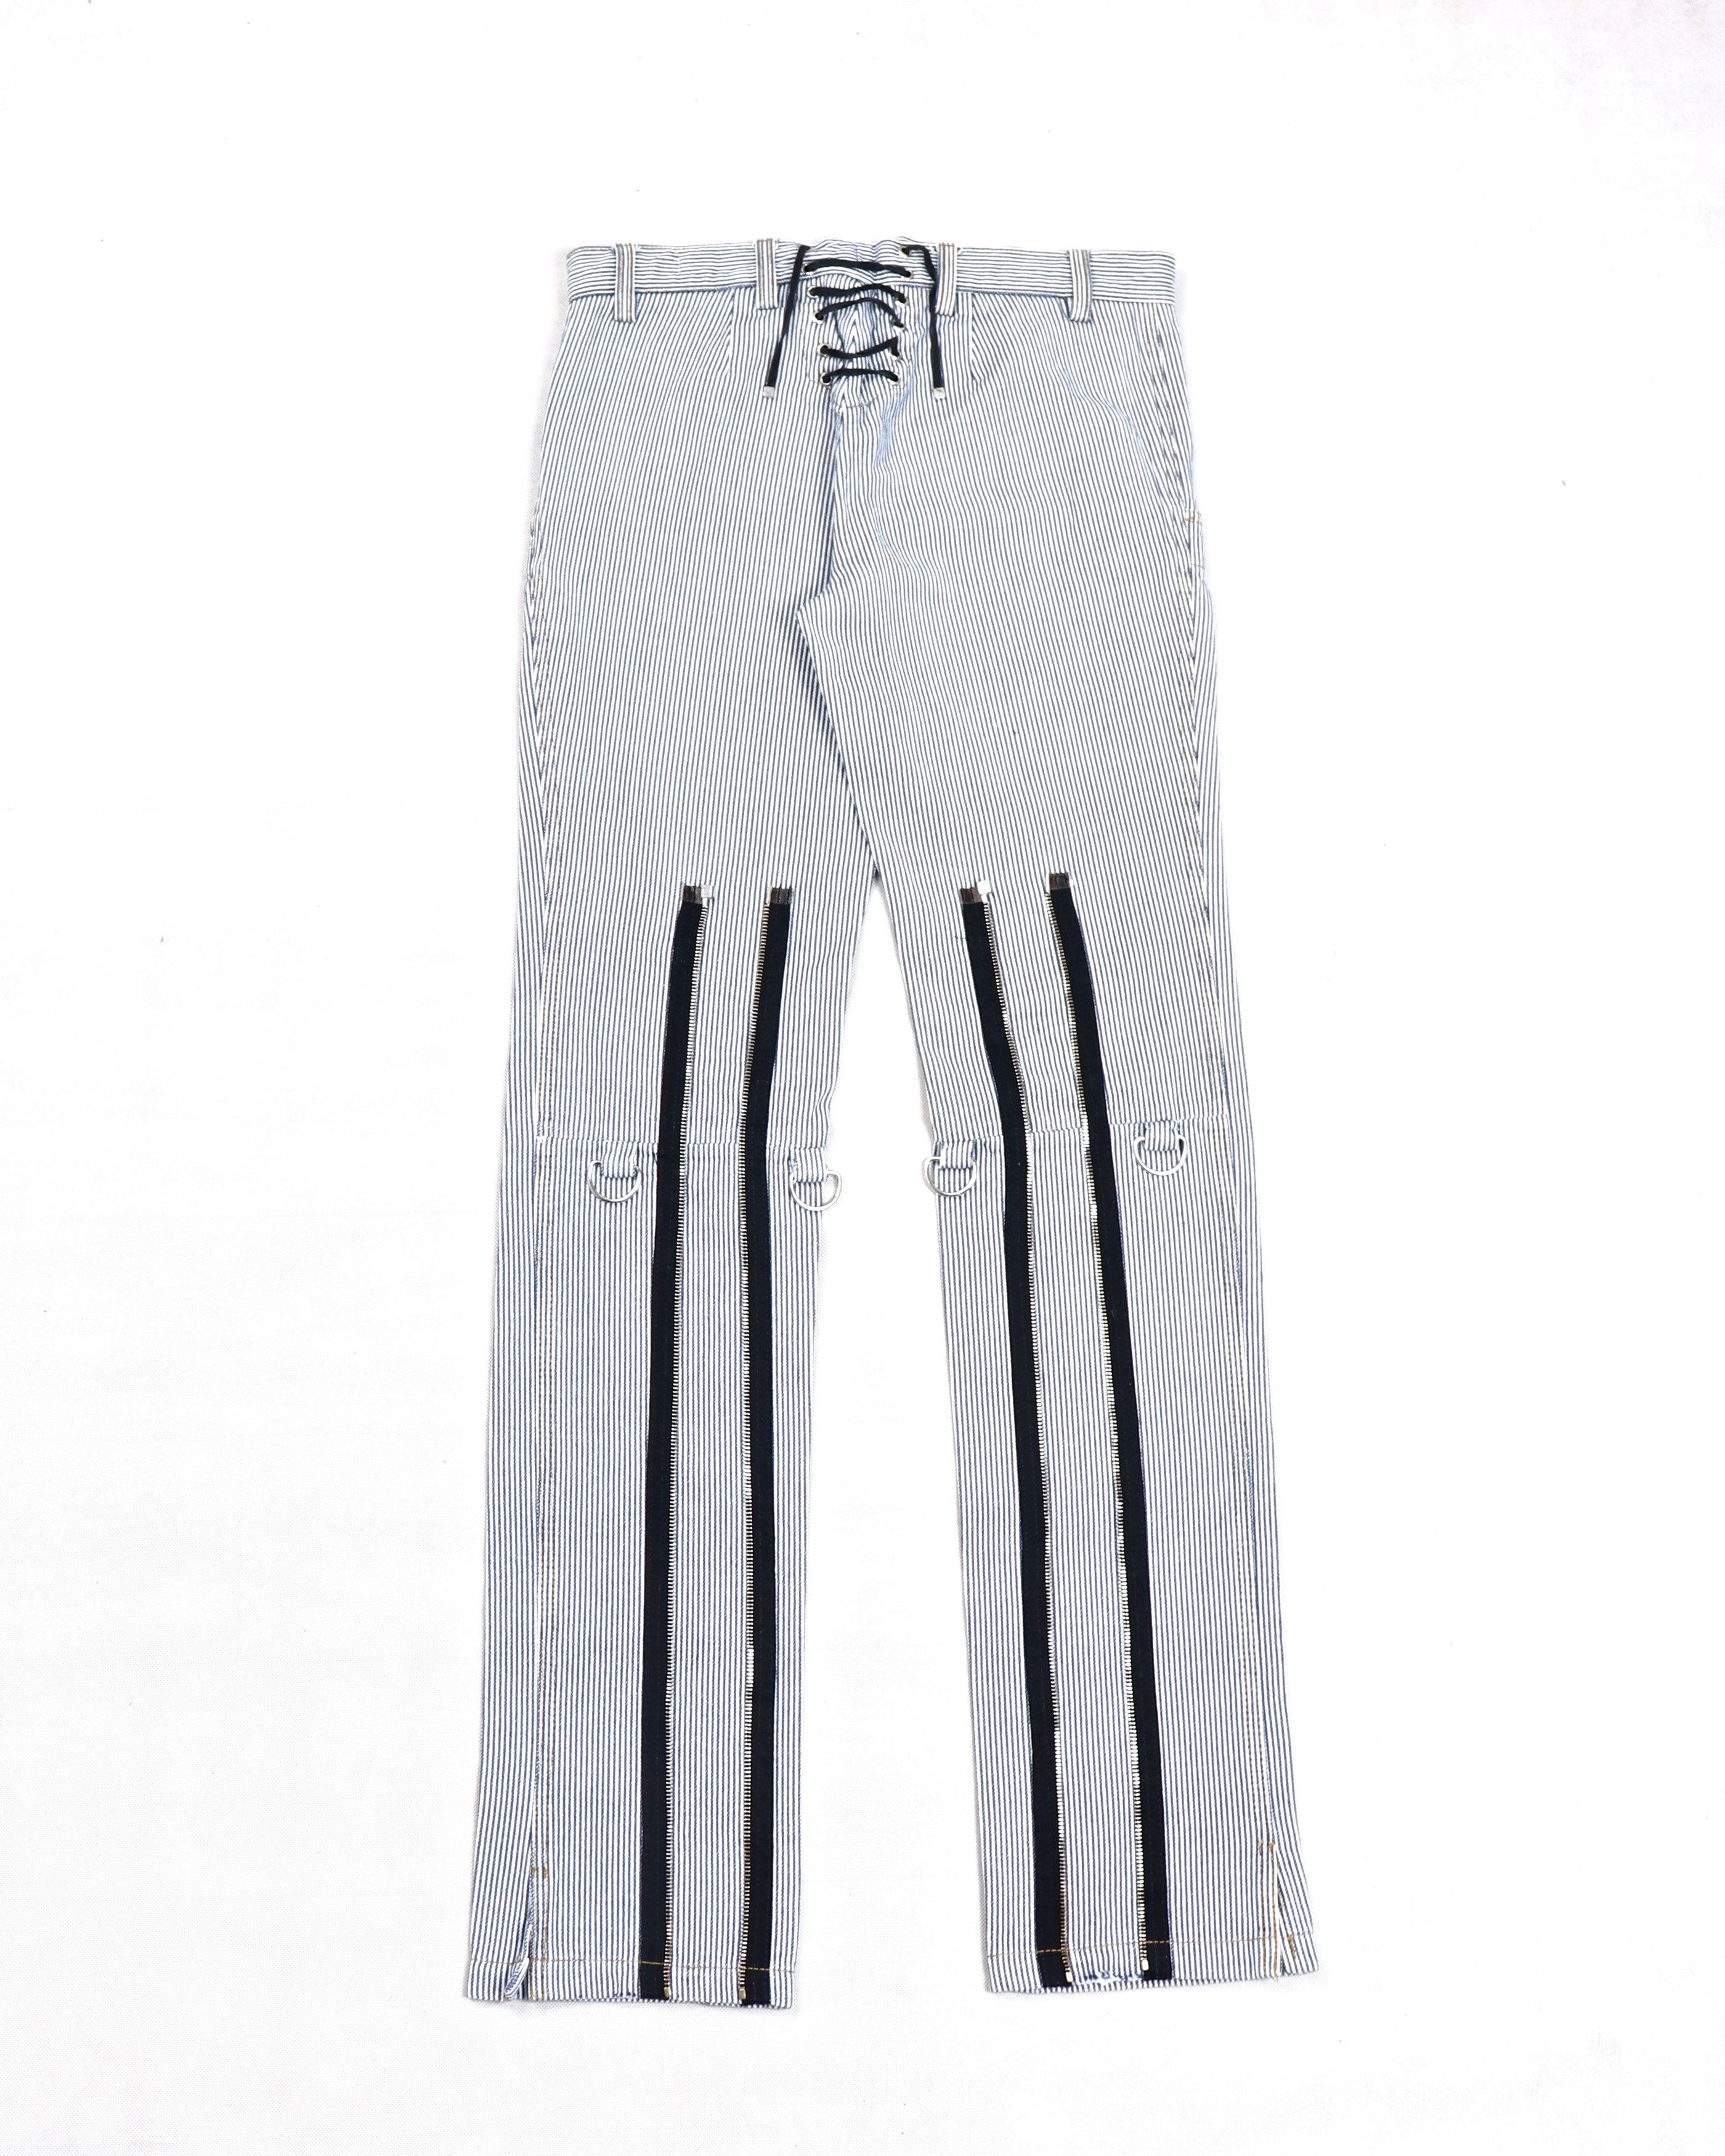 Dolce & Gabbana FINAL PRICE! Runaway Sailor Stripped CLassic Trousers ...